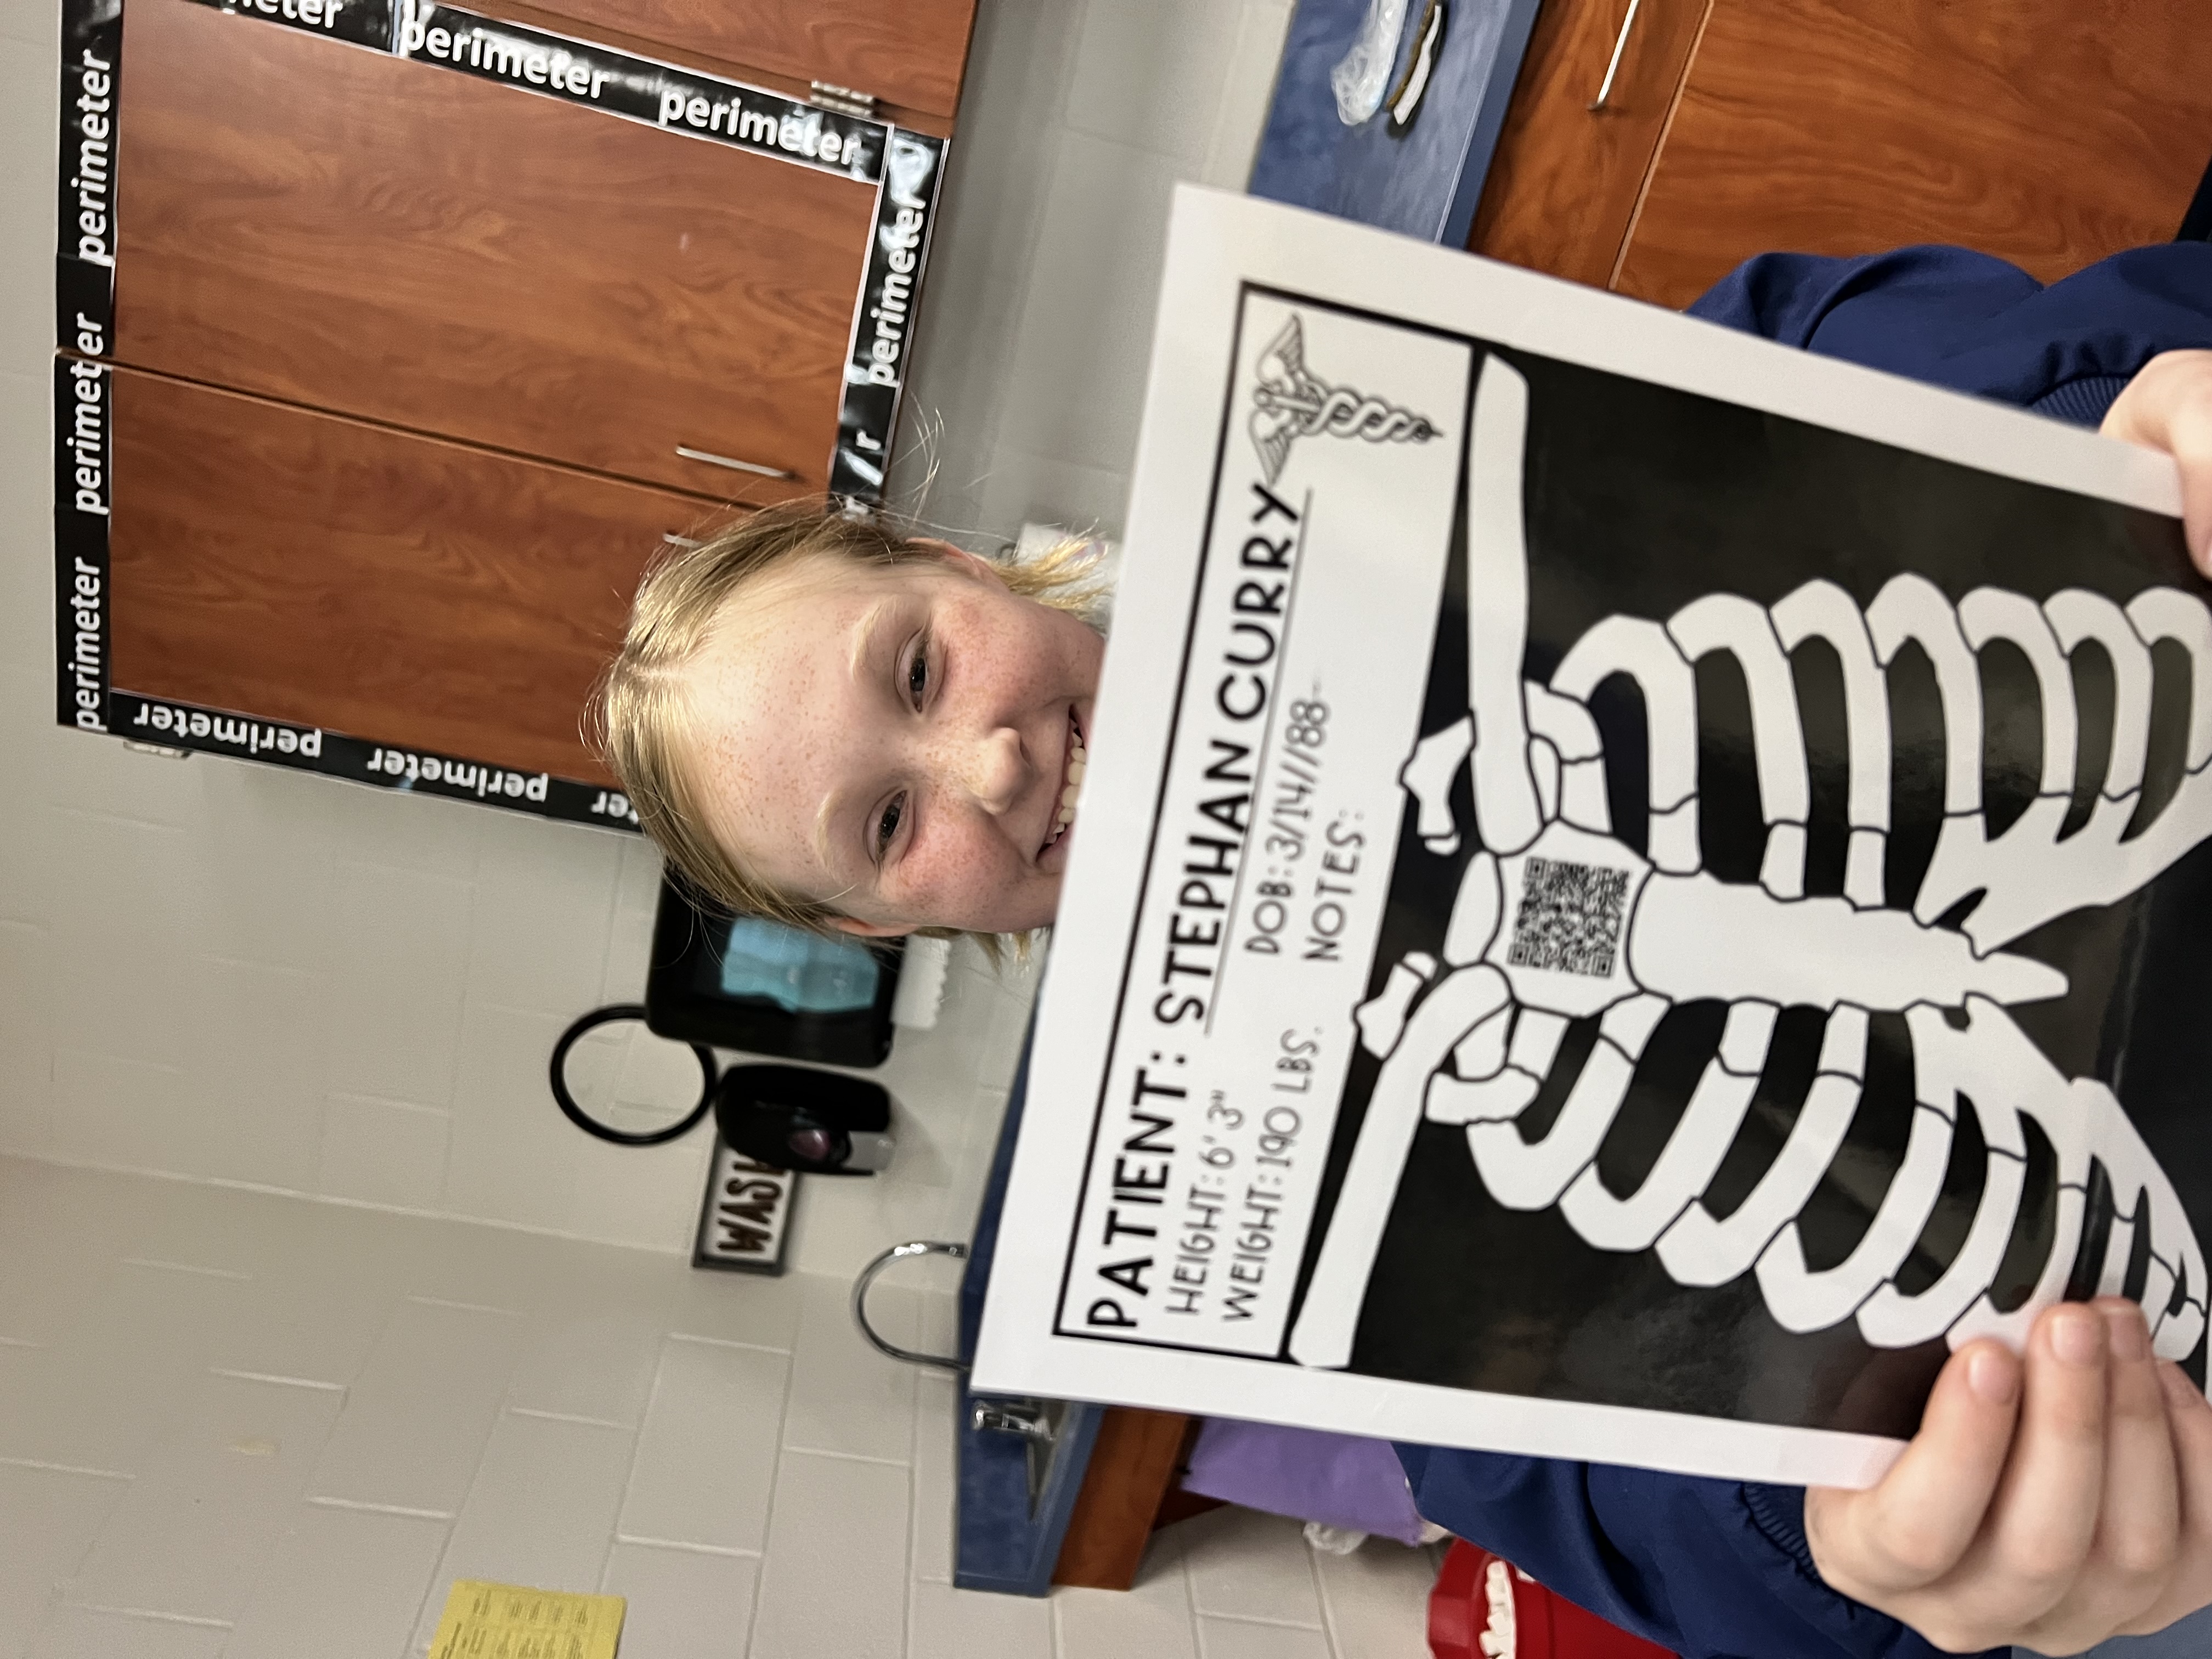 A student shows her mock x-ray of Stephan Curry